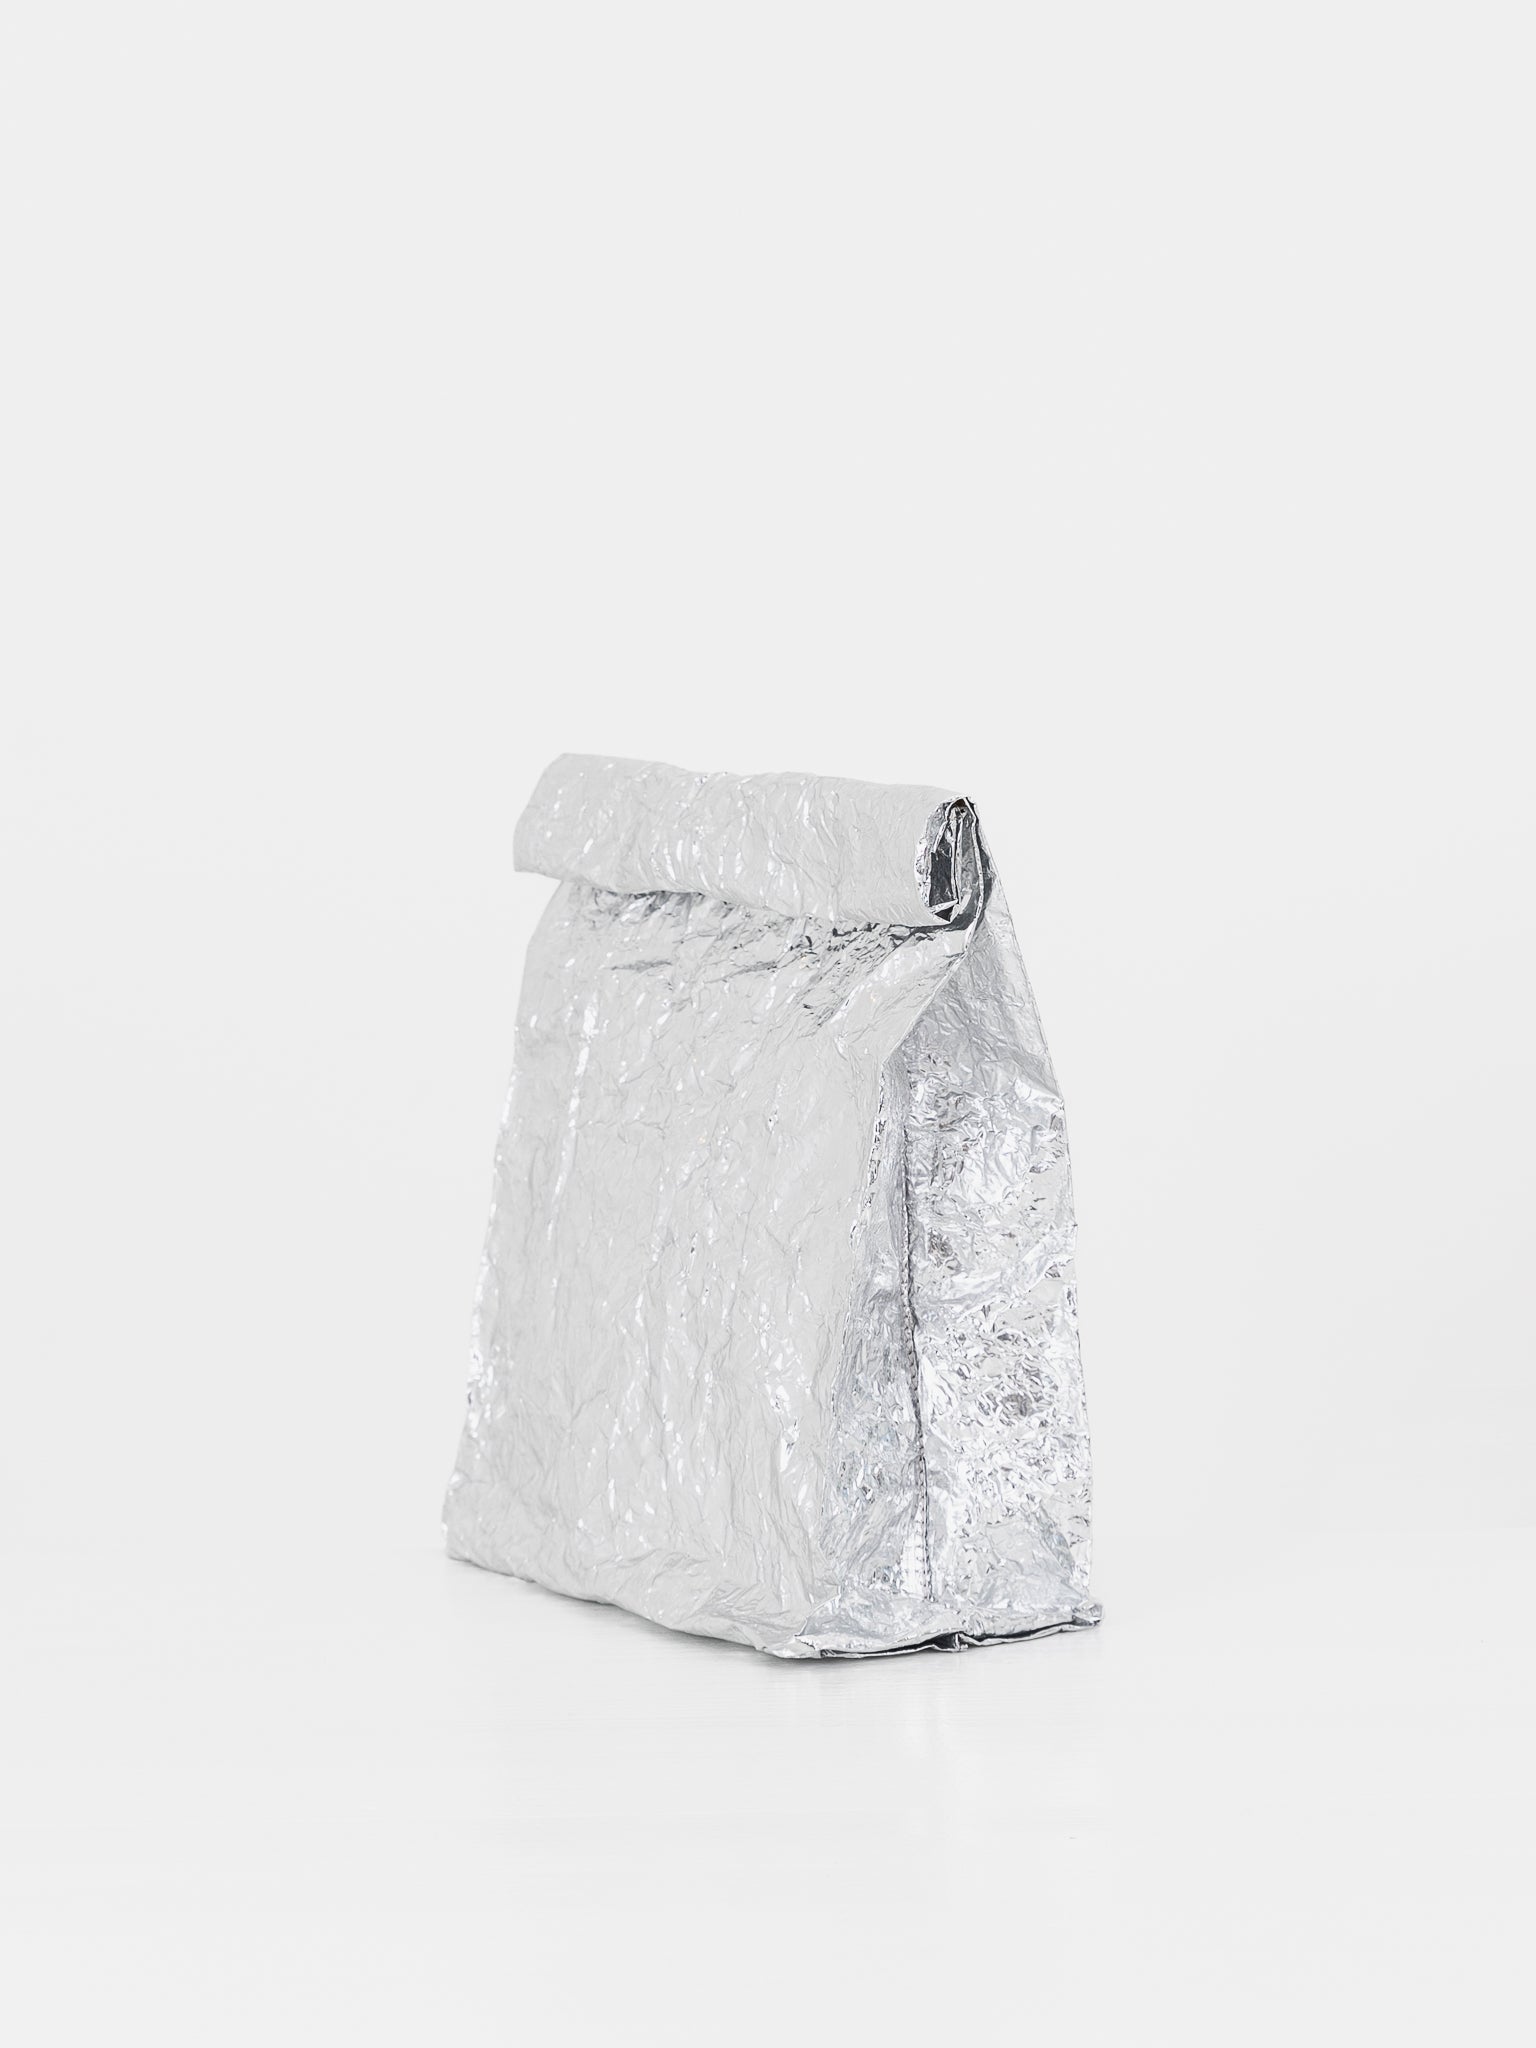 Zilla Lunch Bag, Silver - Worthwhile, Inc.